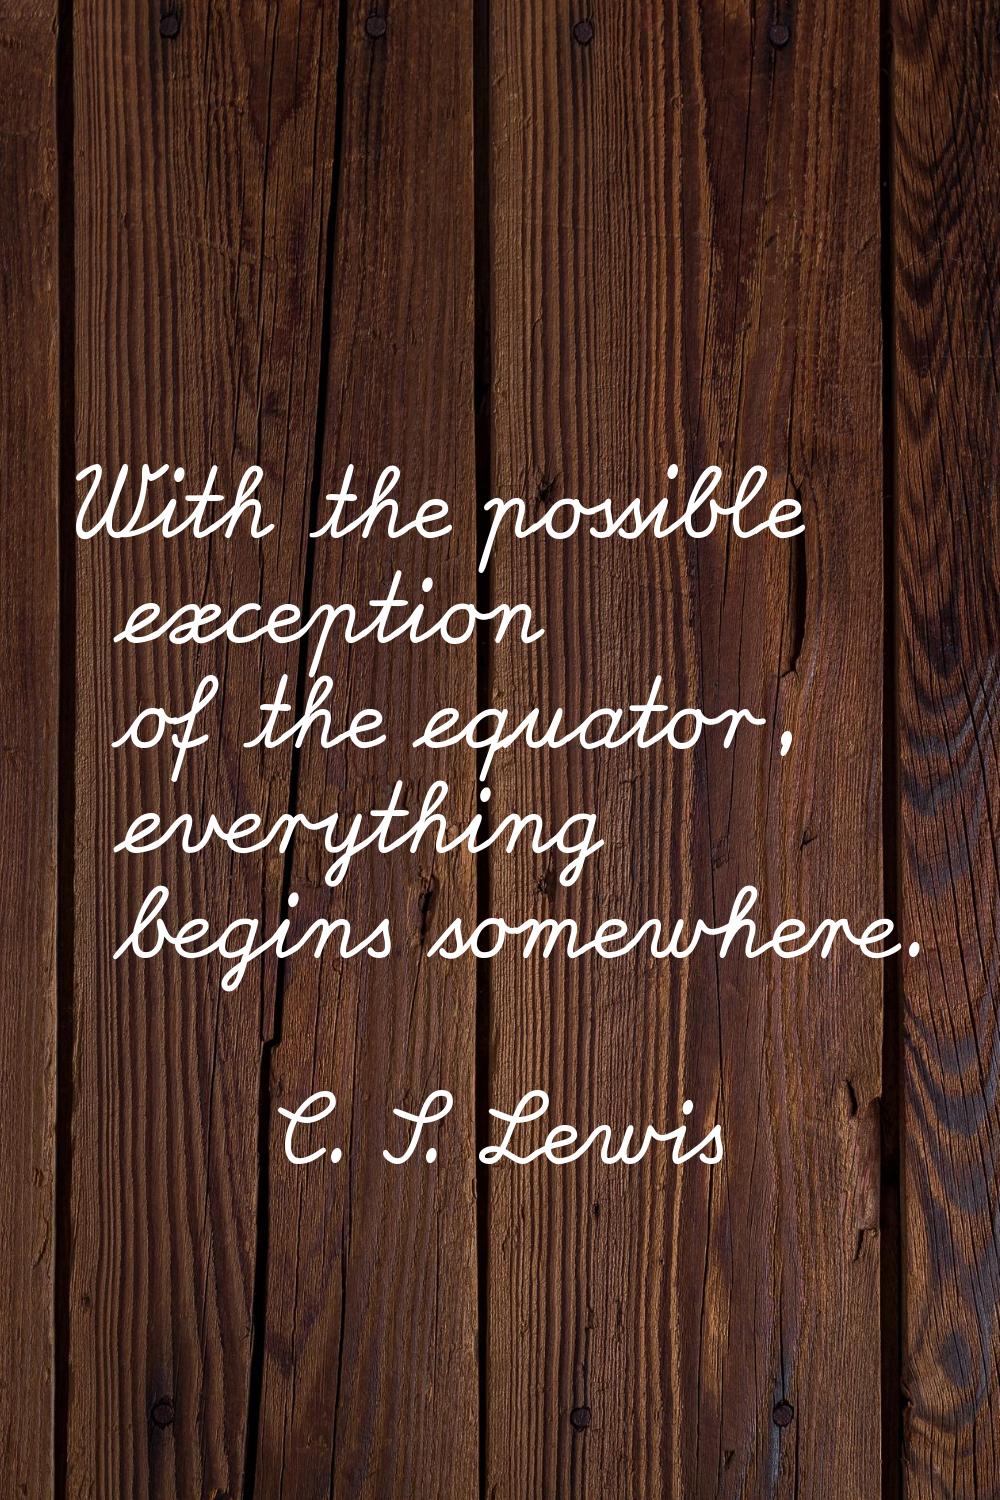 With the possible exception of the equator, everything begins somewhere.